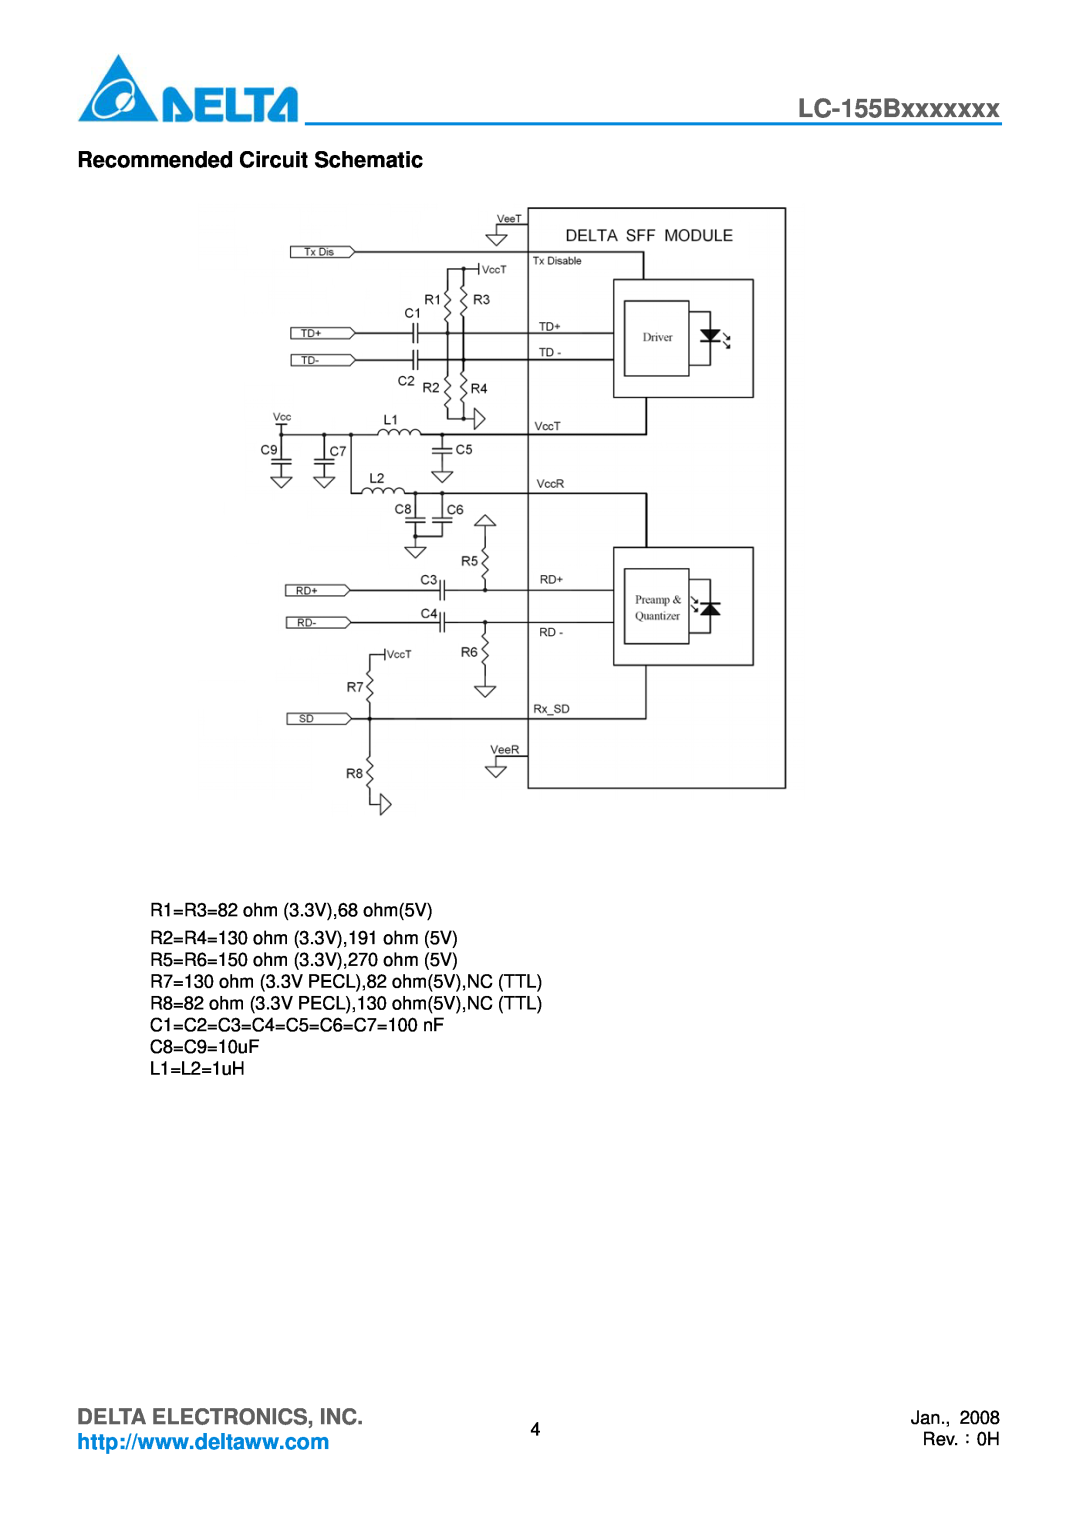 Delta Electronics LC-155Bxxxxxxx manual Recommended Circuit Schematic, Delta Electronics, Inc, R1=R3=82 ohm 3.3V,68 ohm5V 